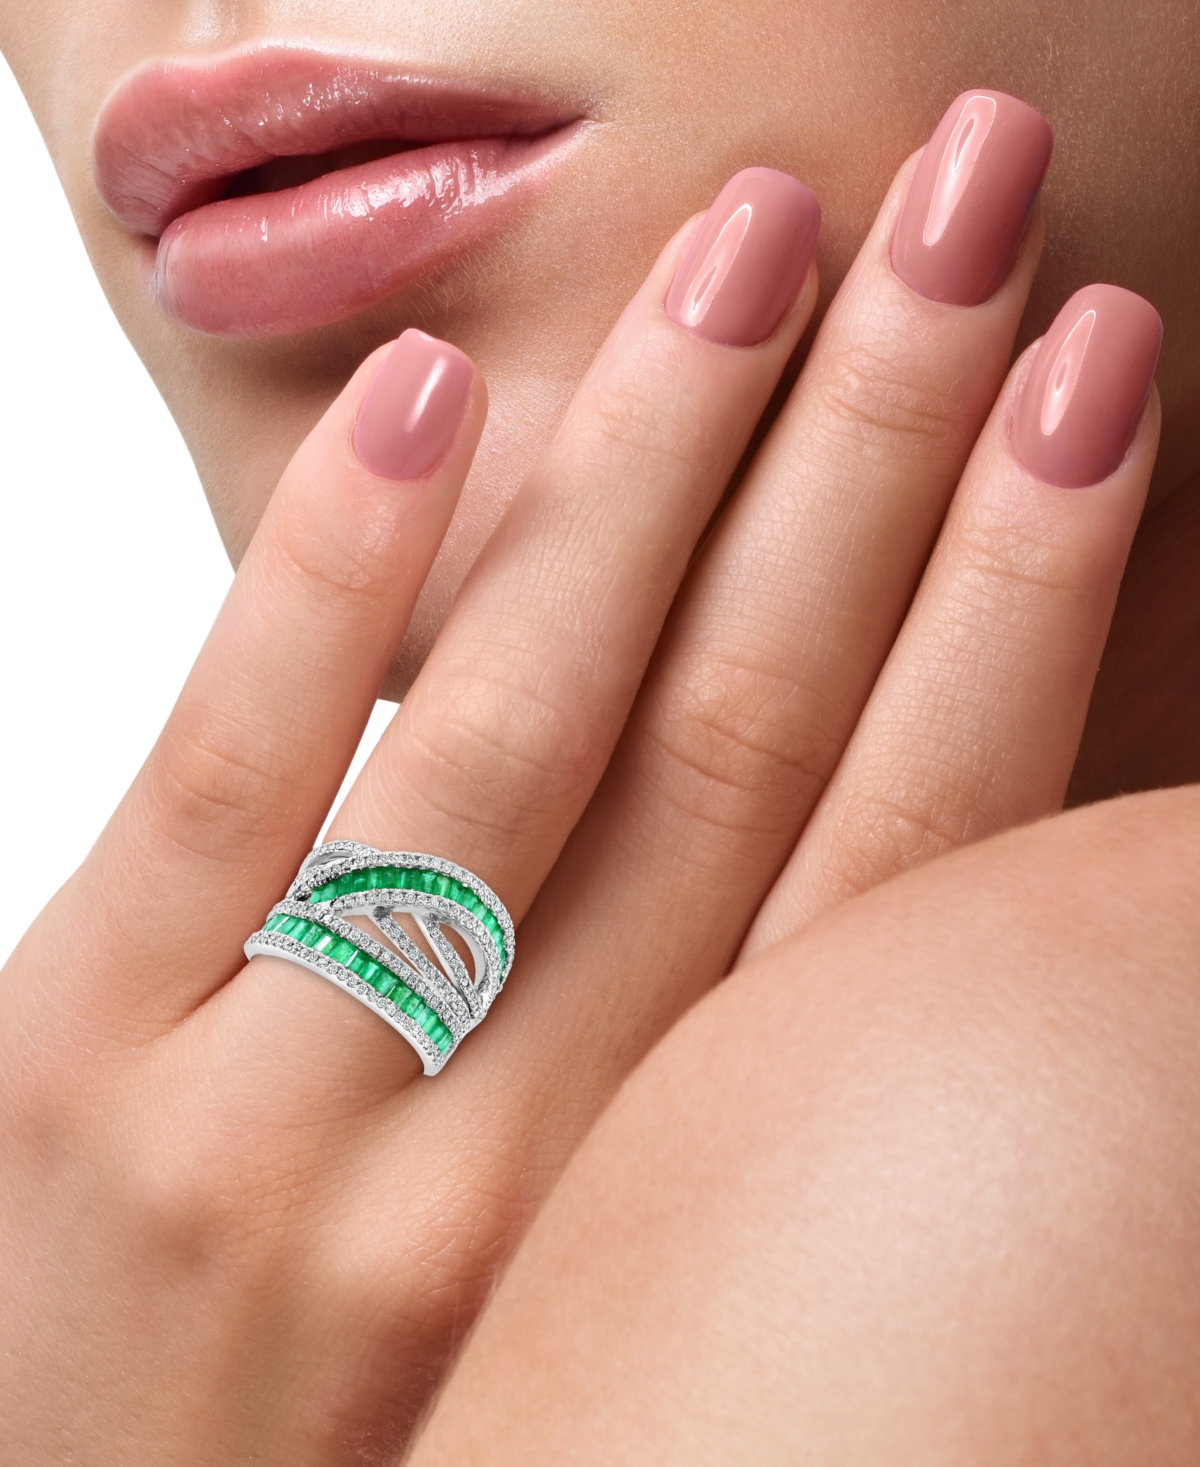 Shop Effy Collection Effy Emerald (1-7/8 Ct. T.w.) & Diamond (5/8 Ct. T.w.) Crossover Statement Ring In 14k White Gold